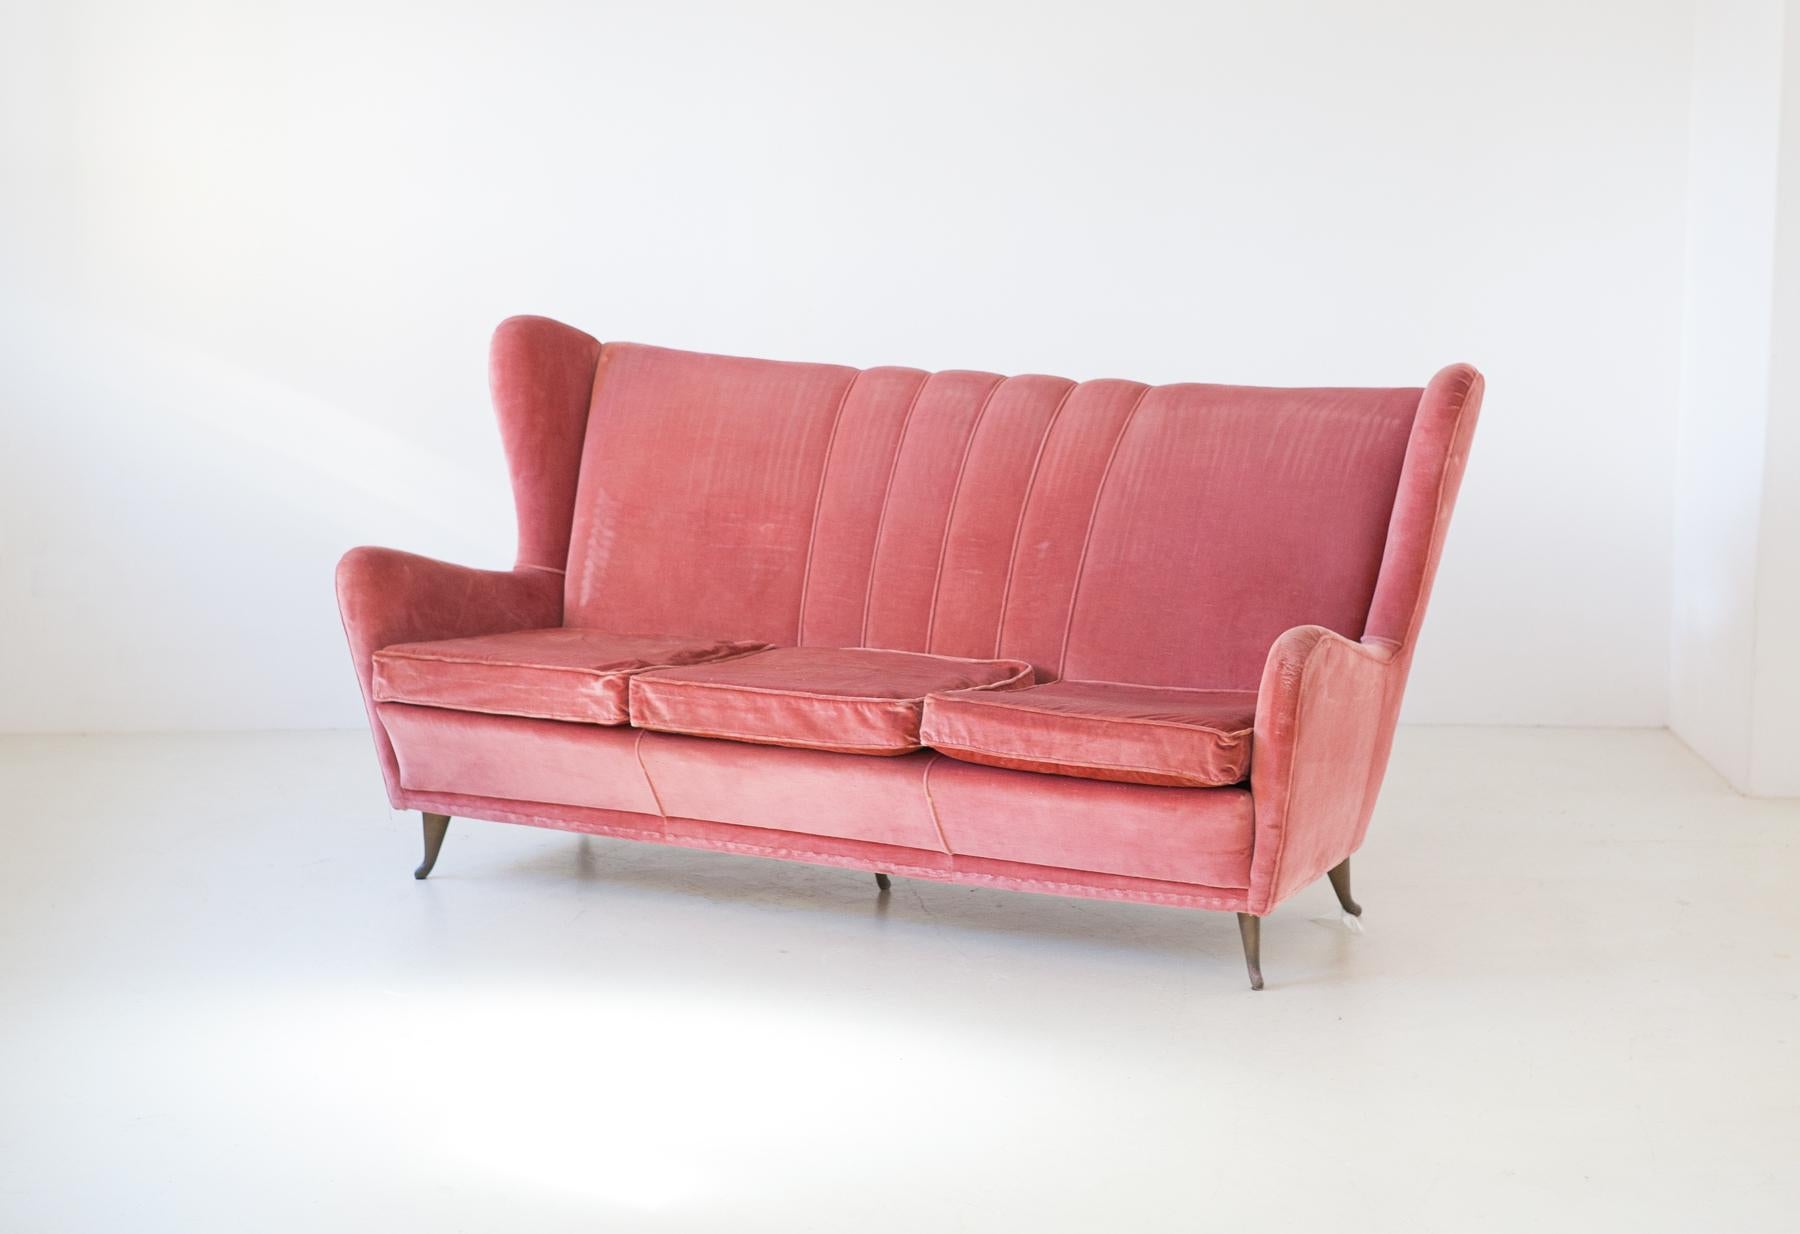 Italian three-seat sofa manufactured by ISA Bergamo during the 1950s

Elegant and modern design

The general conditions are good even if many signs of wear are present, anyway we suggest to replace it. Its possible to request new upholstery